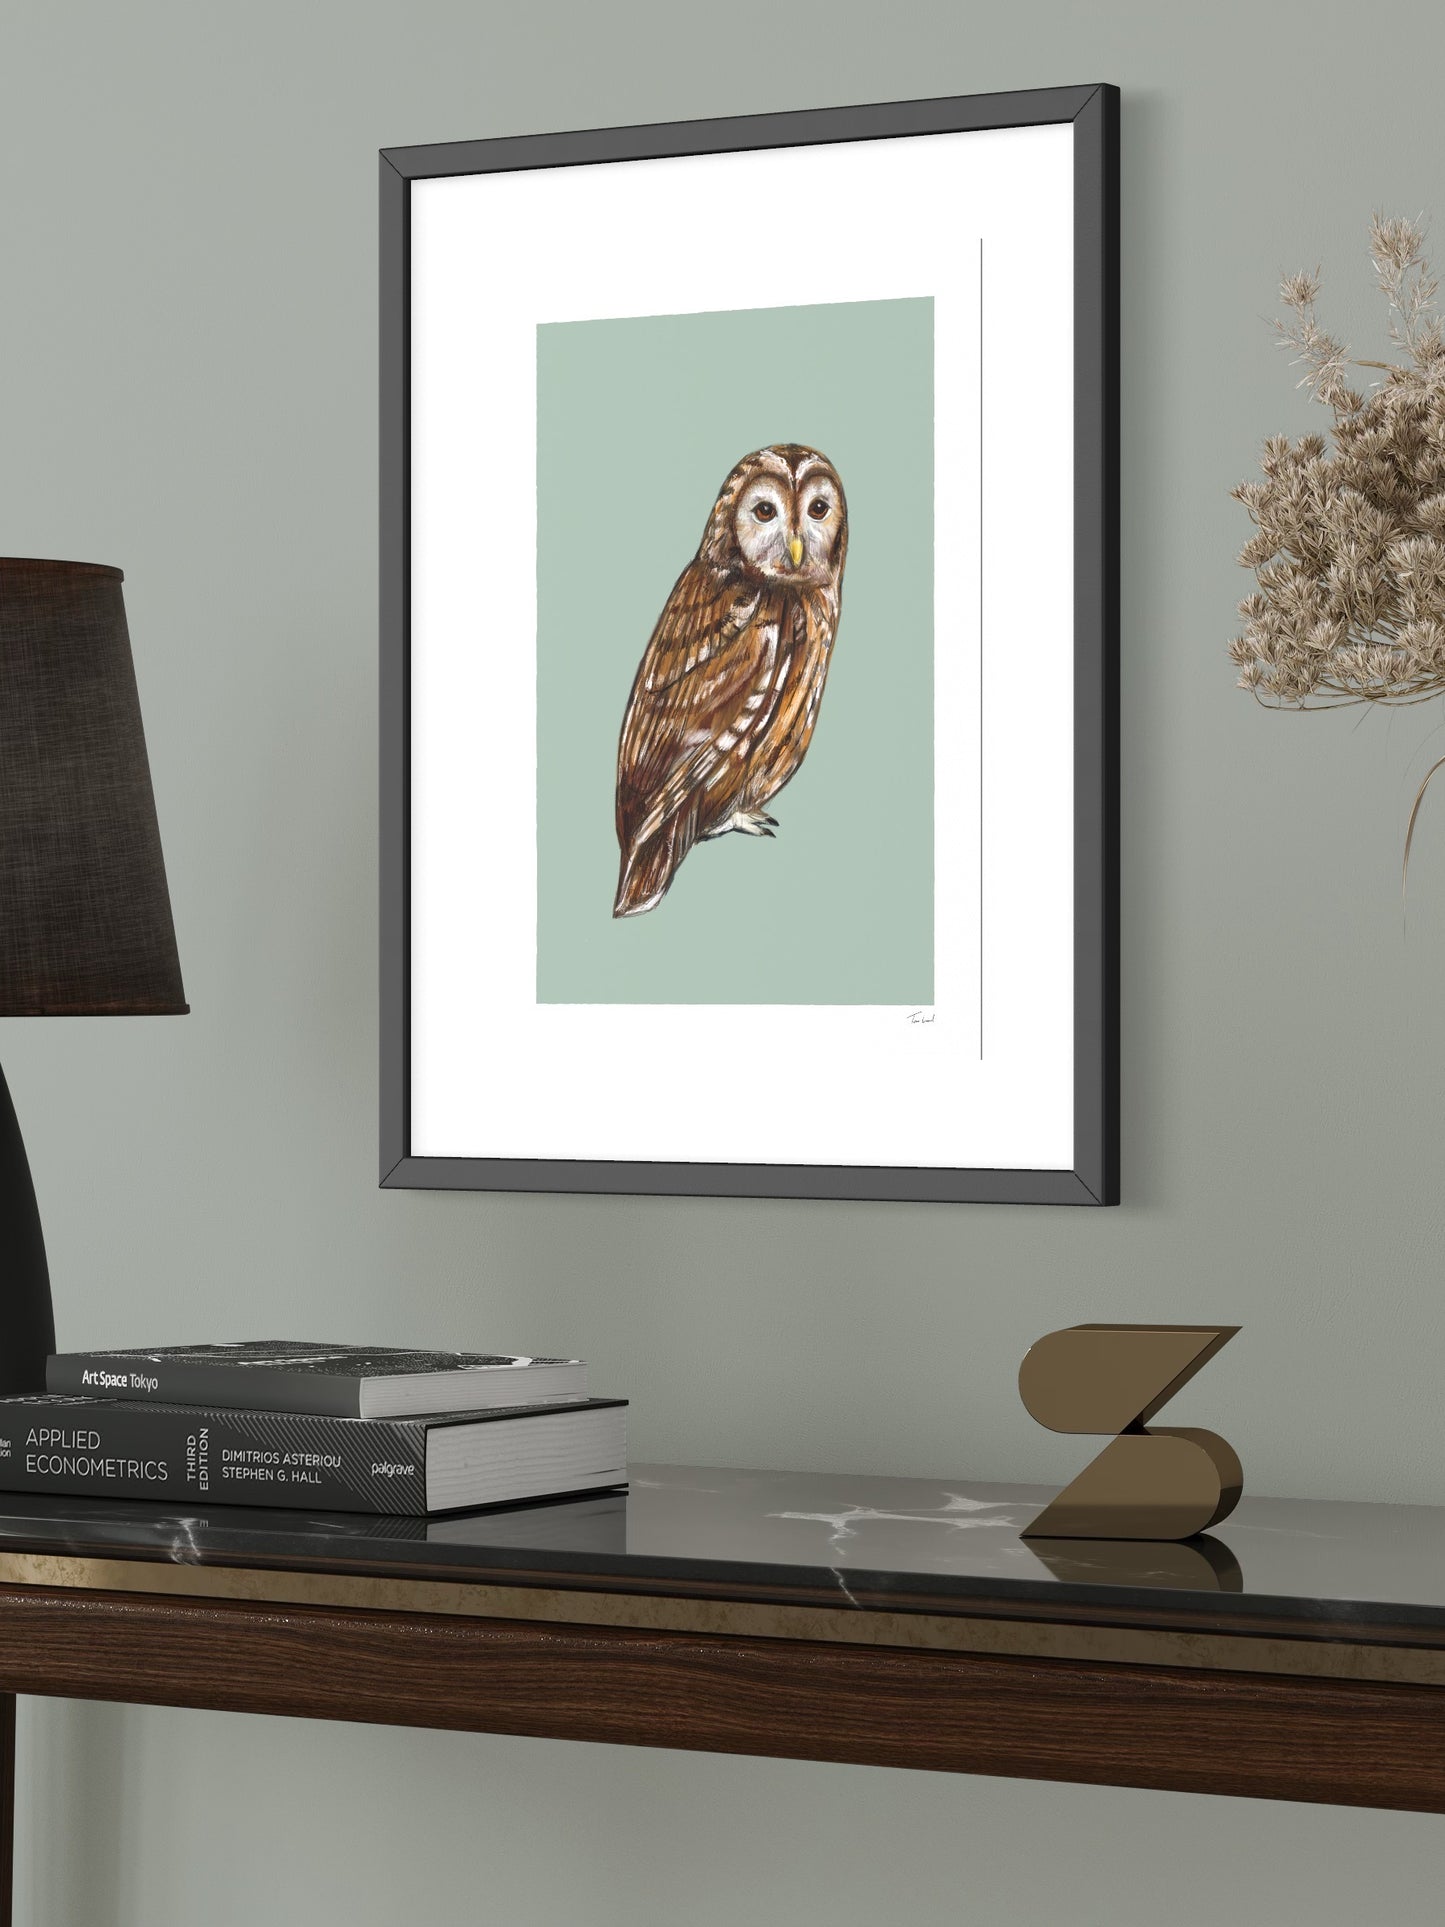 This image shows a giclee wall art print by Tom Laird Illustration of a Tawny Owl, framed in a beautiful living room with tasteful modern home decor. This art print is available from Tom Laird Illustration in various sizes.